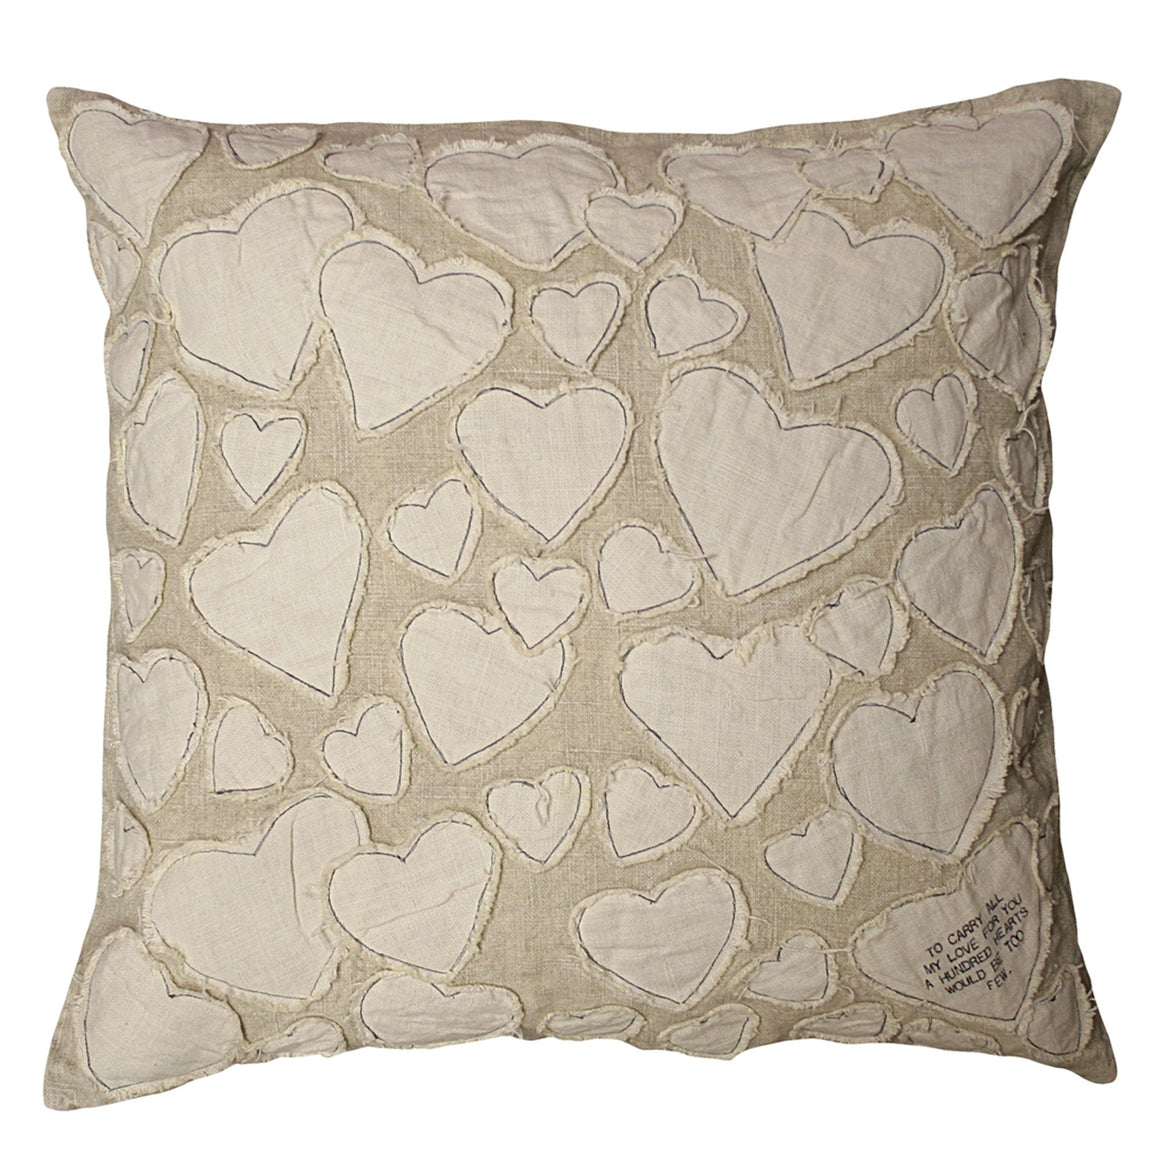 Pillow Collection - To Carry All My Love